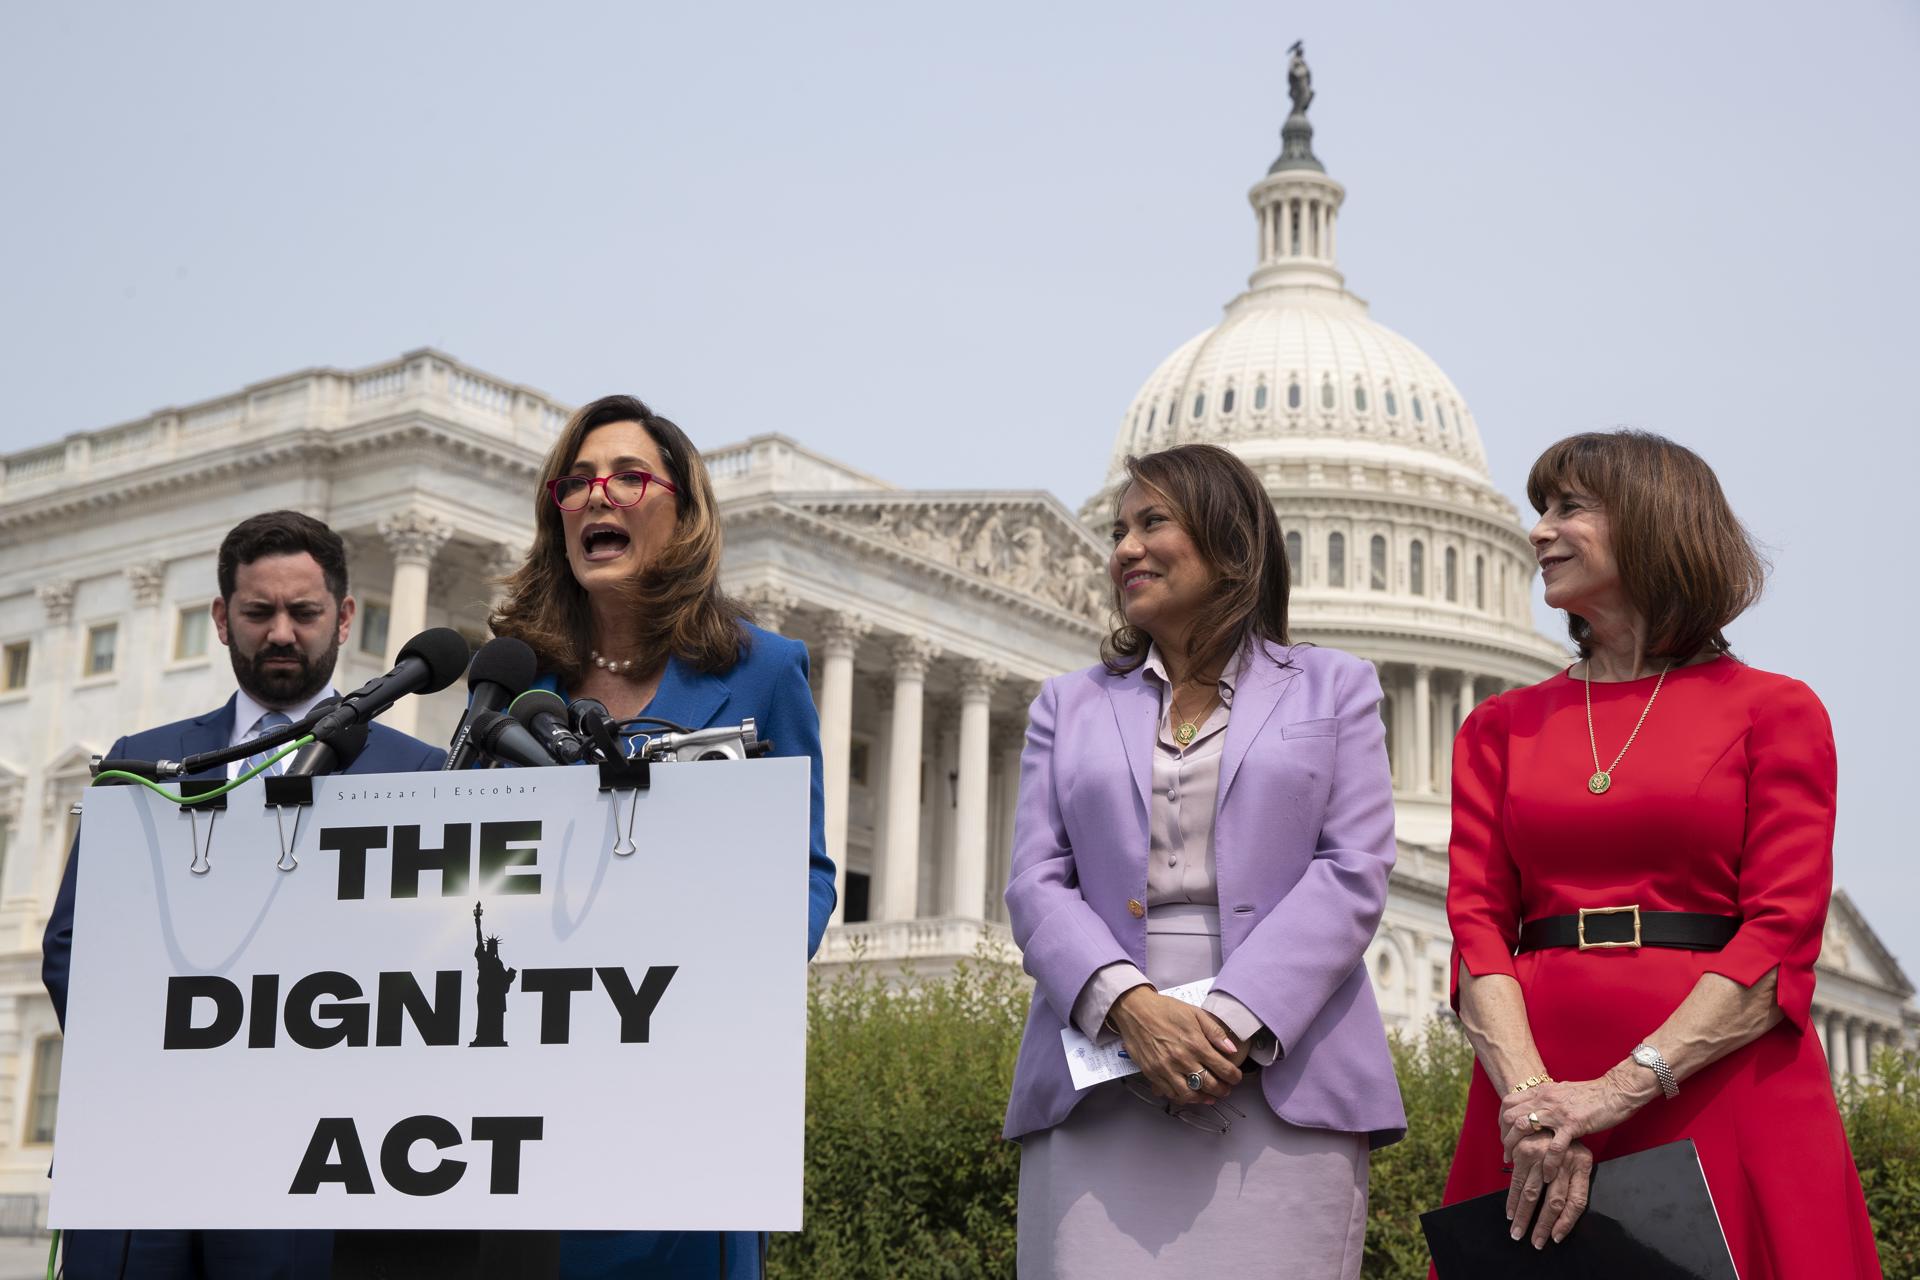 (Left to right) Republican lawmakers Mike Lawler and Maria Elvira Salazar; and Democratic Congresswomen Veronica Escobar and Kathy Manning participate in a press conference to introduce bipartisan immigration reform legislation dubbed "The Dignity Act" in Washington DC on May 23, 2023. EFE/EPA/Michael Reynolds
